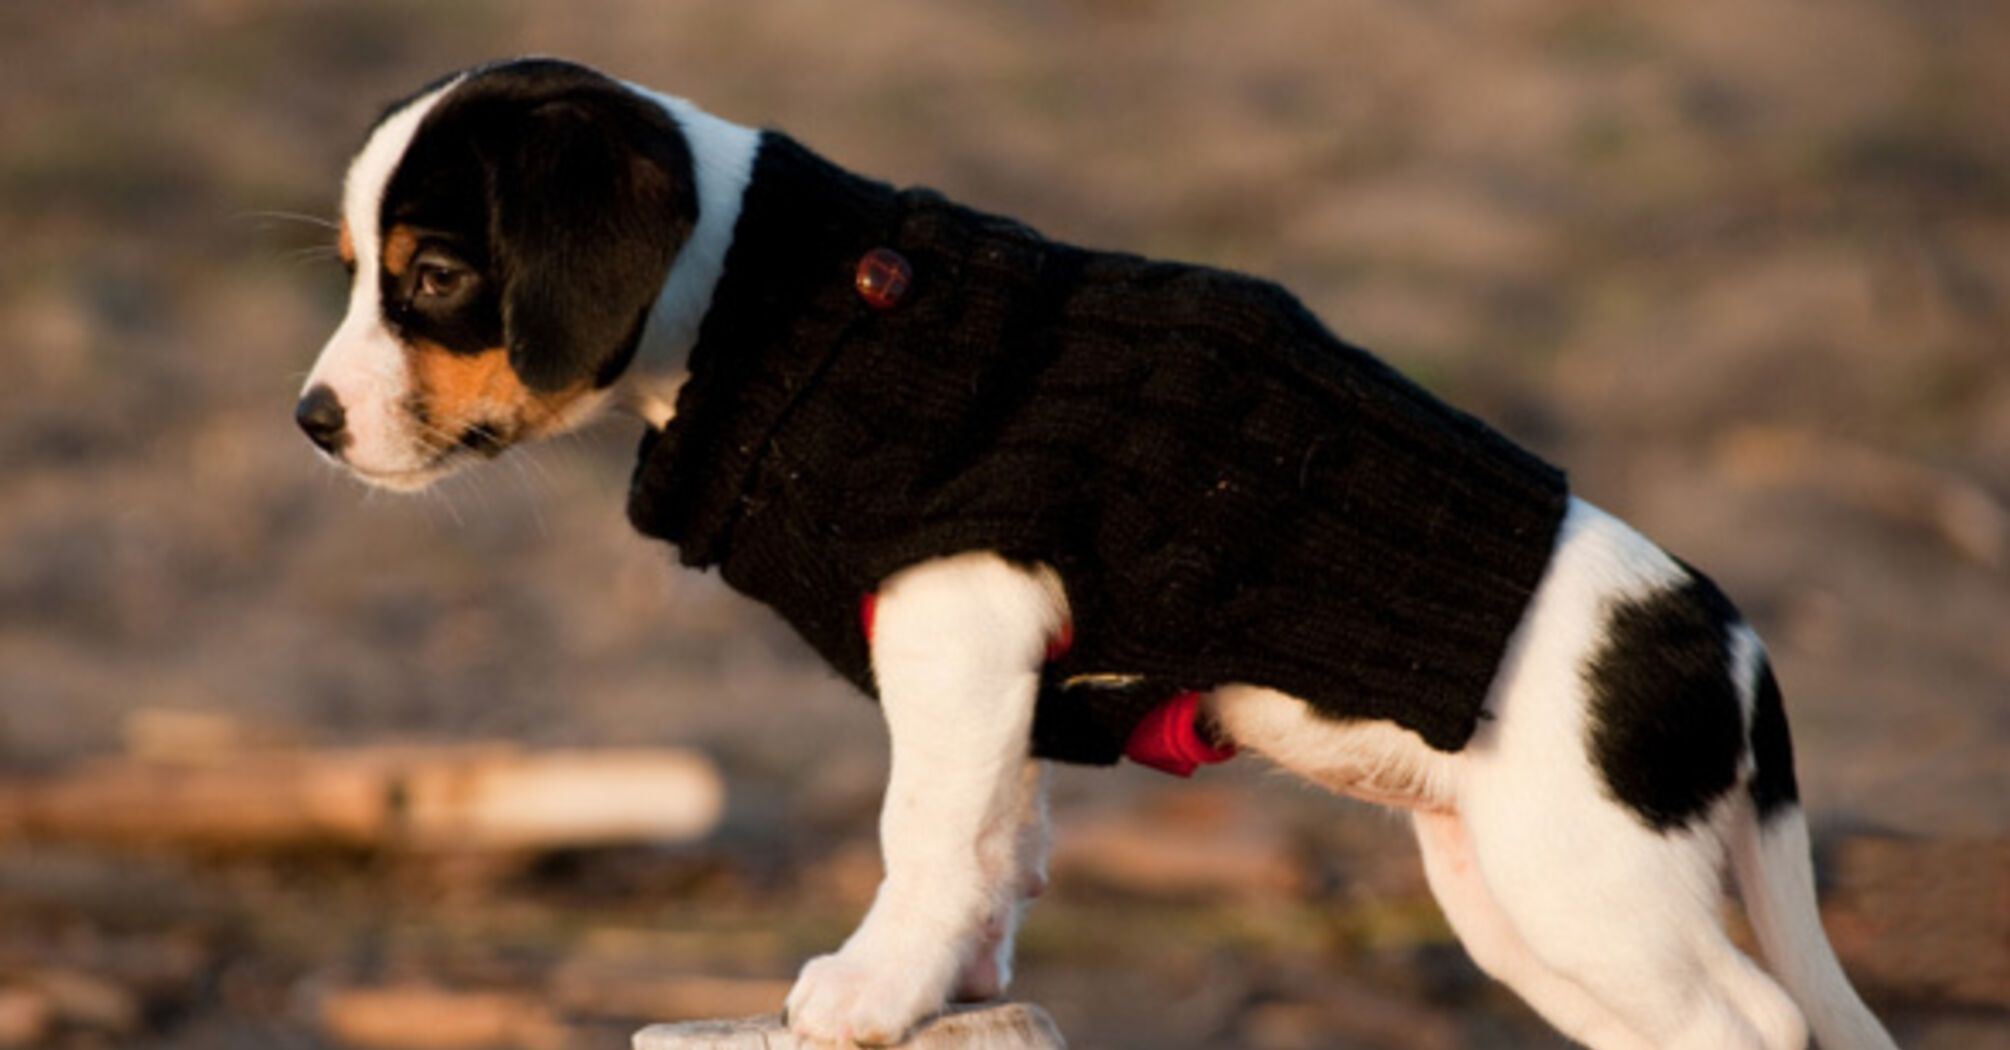 How to train a dog to wear clothes